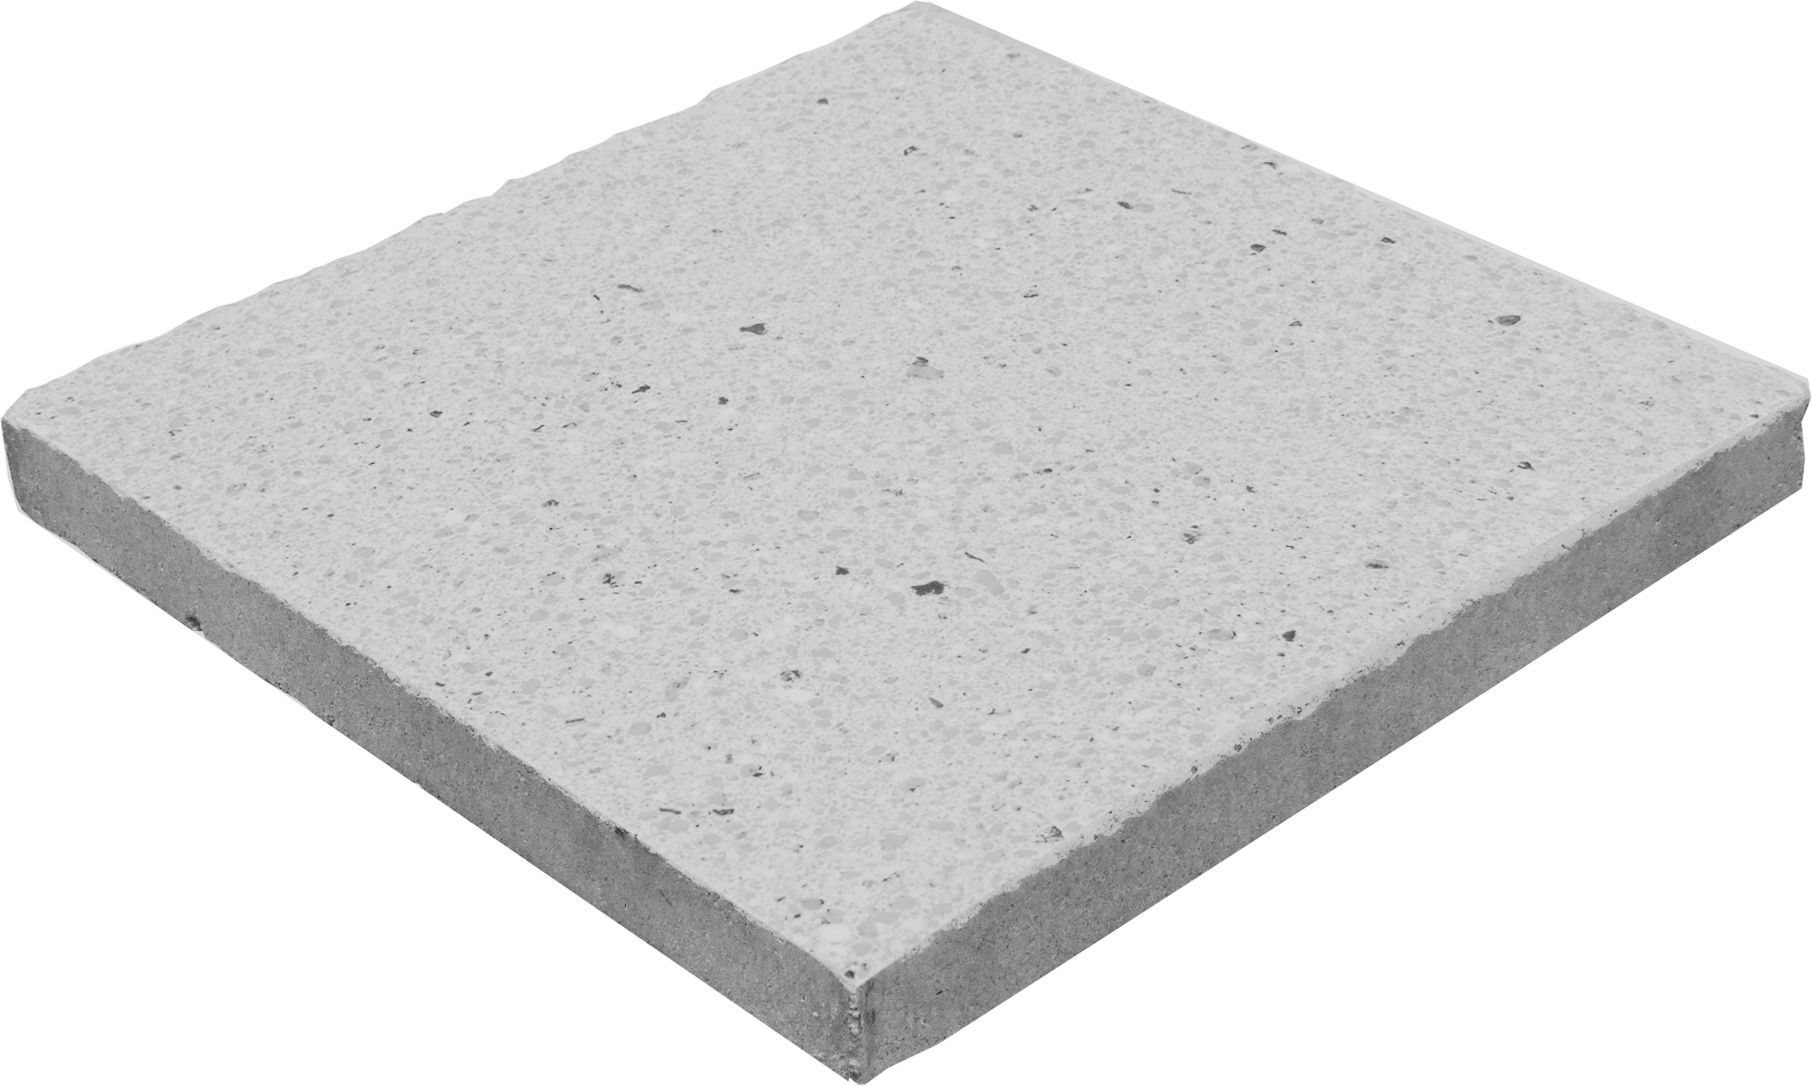 Panache Ground White Reconstituted Stone Paving Slab L 450mm W 450mm Pack Of 40 Diy At B Q